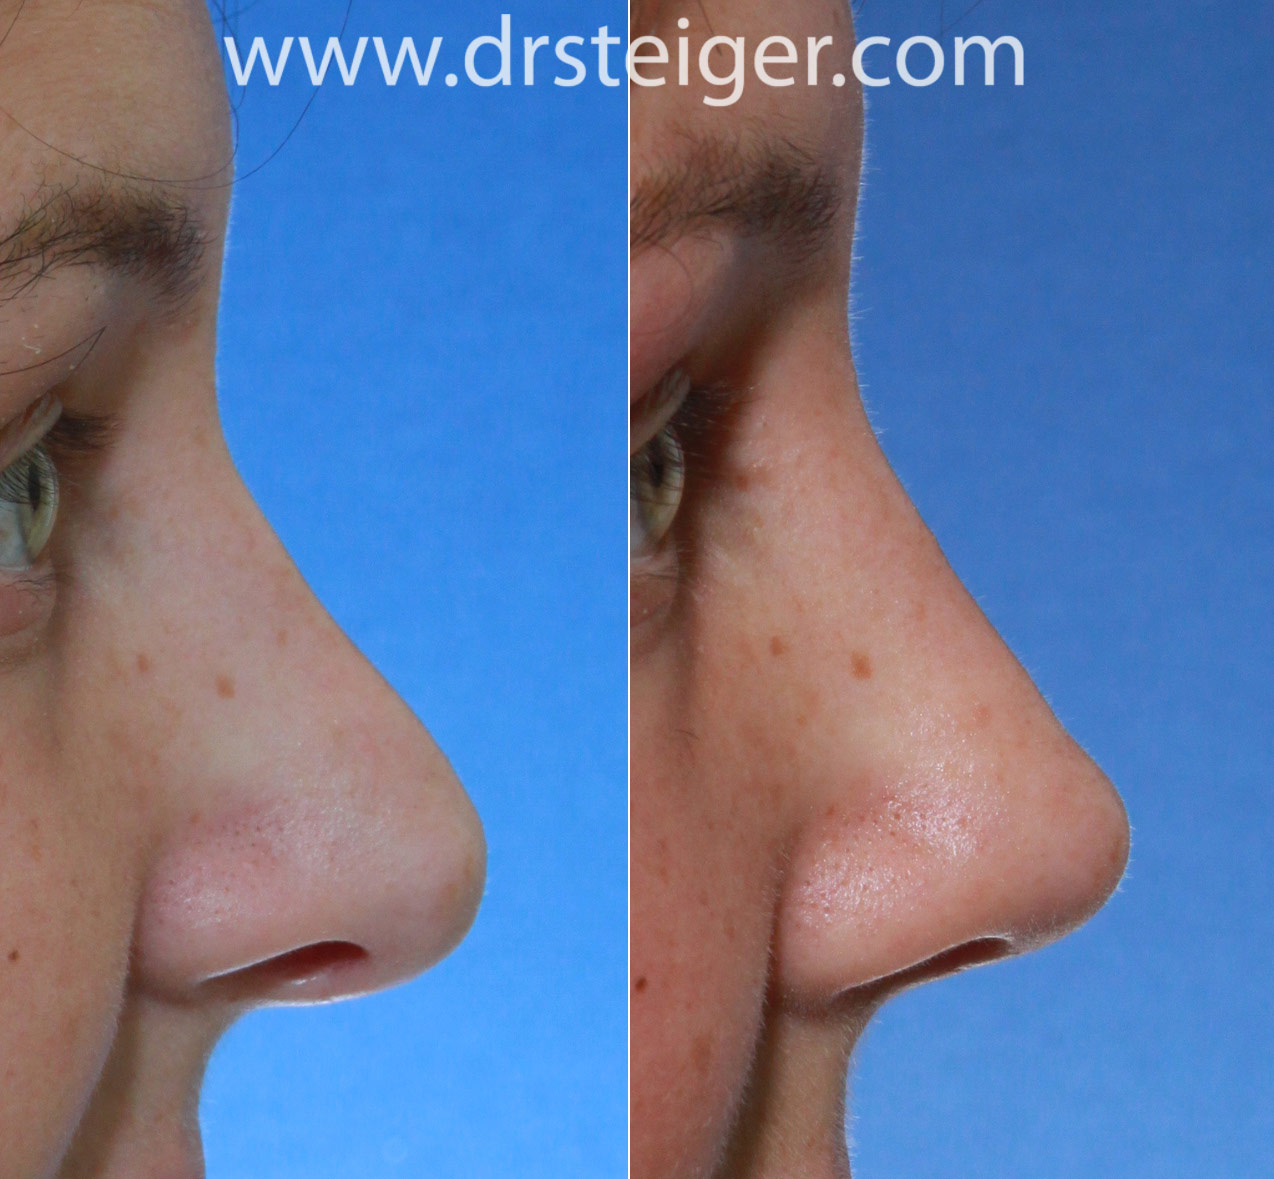 revision rhinoplasty to lift the nasal tip